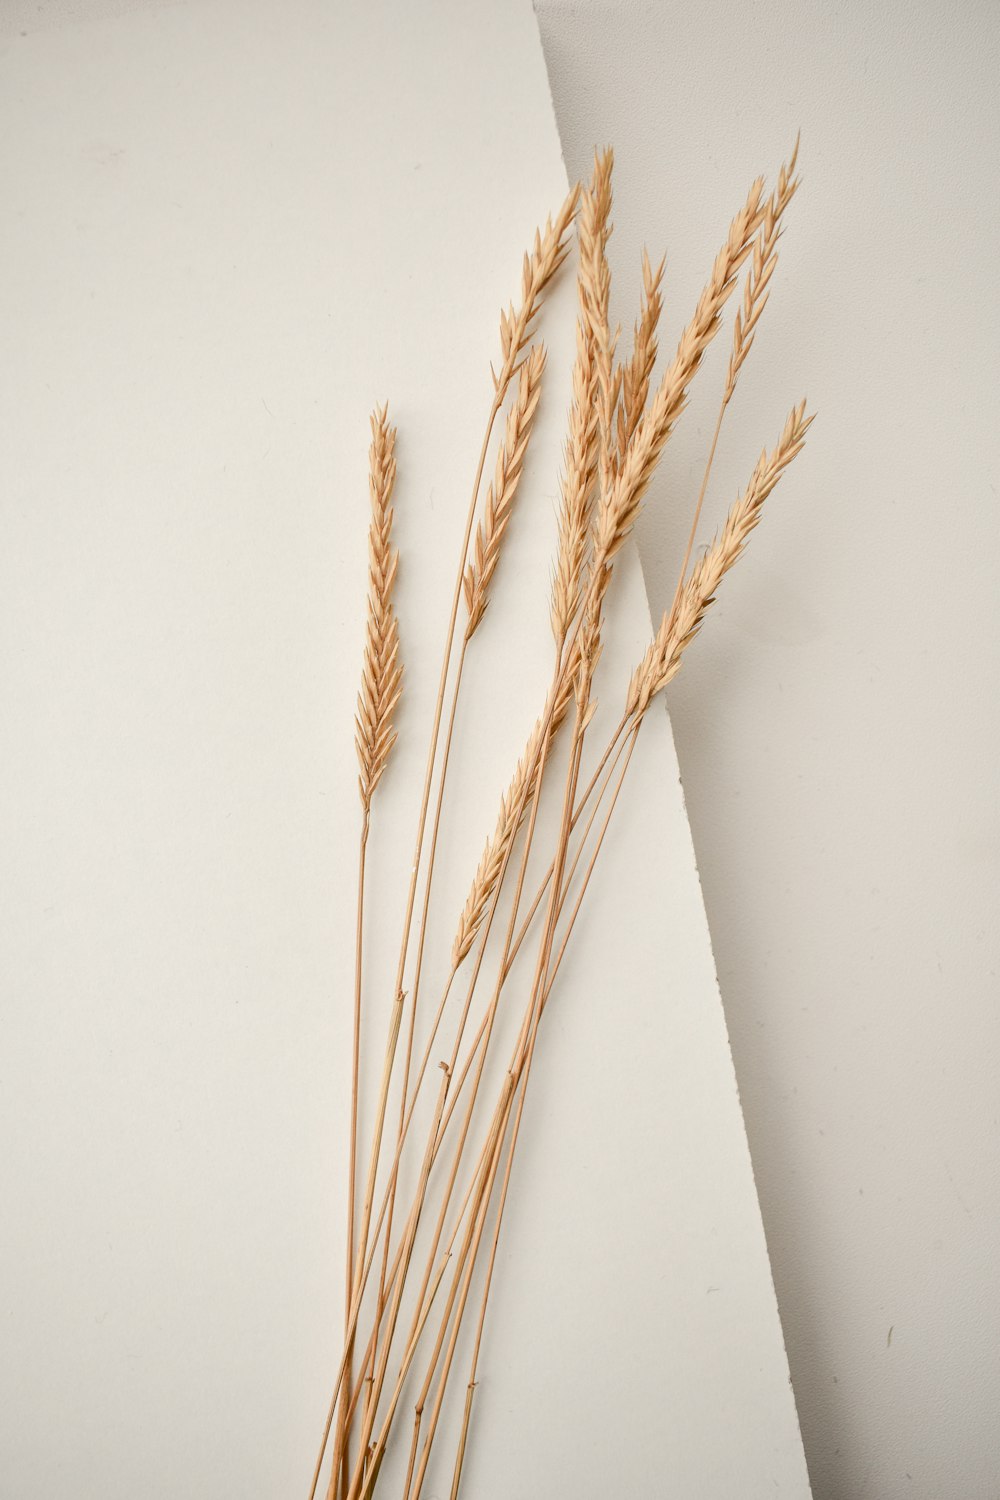 brown wheat on white surface